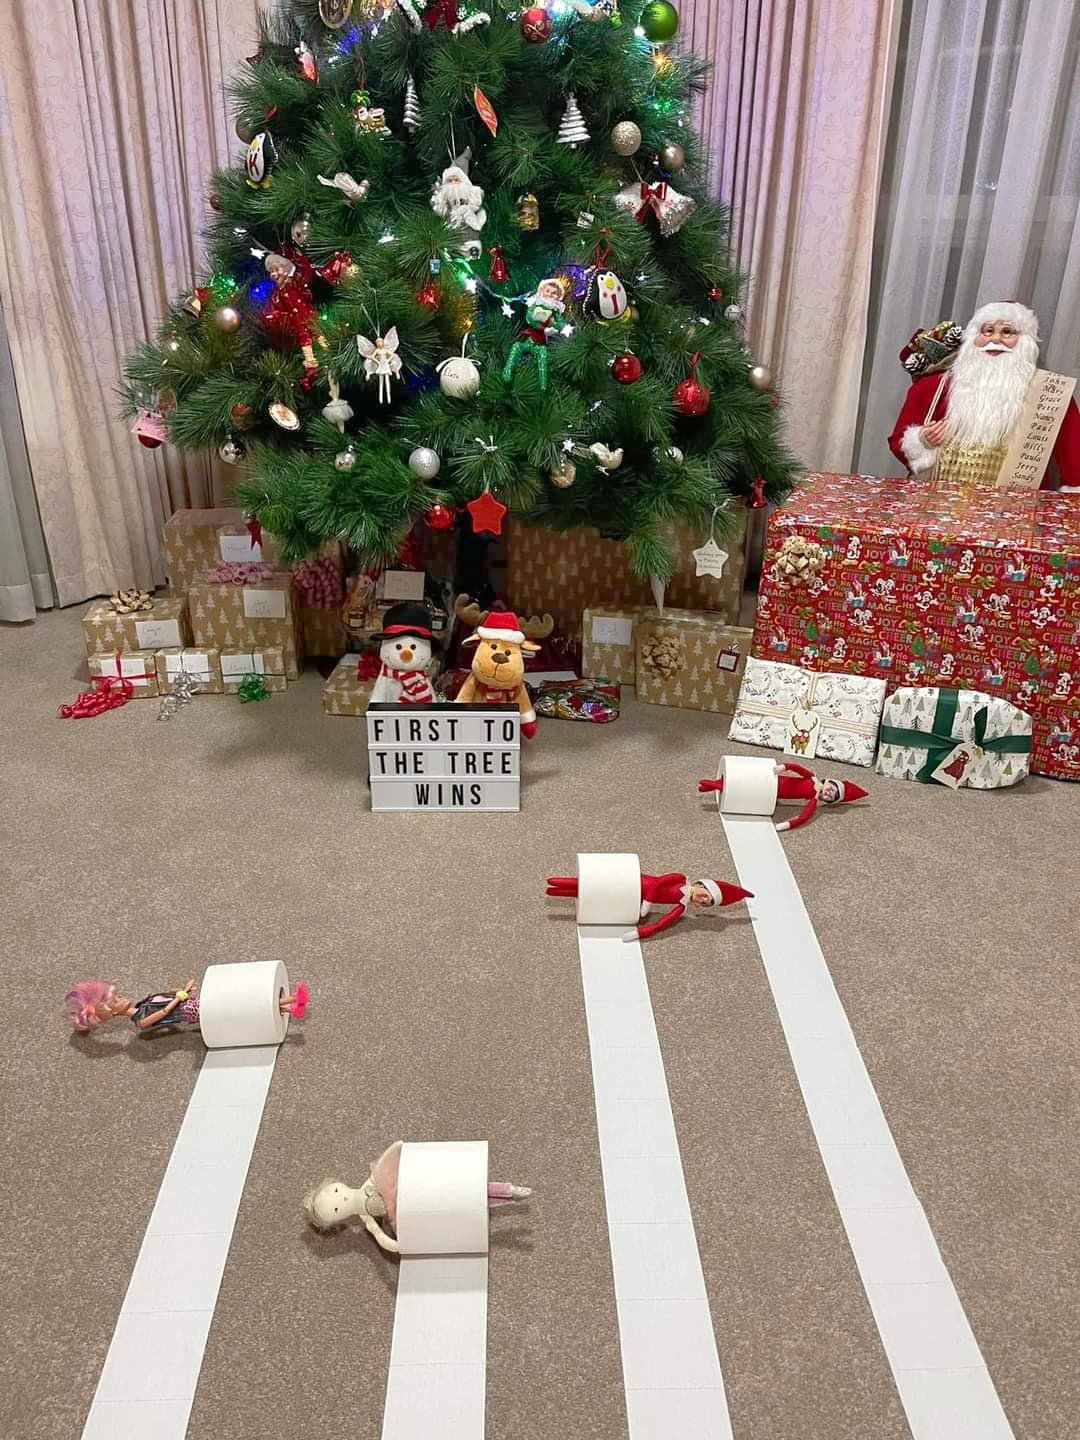 elf and other toys having a race in toilet paper rolls